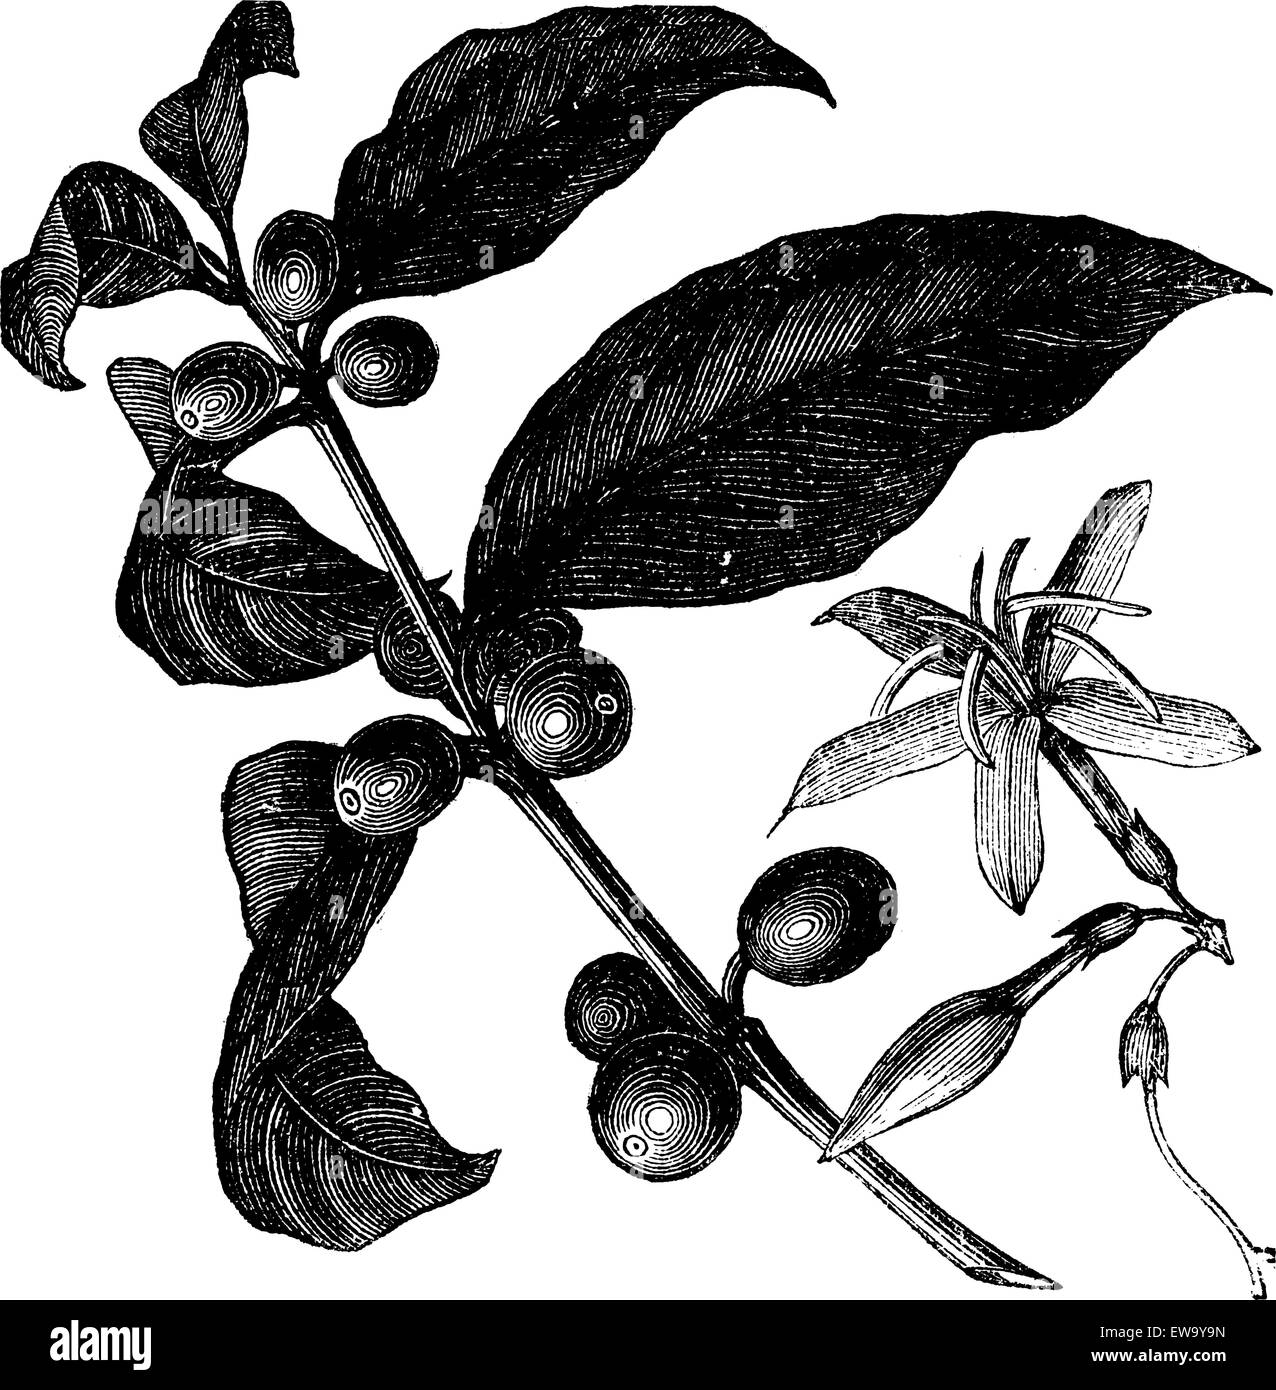 Coffea, or Coffee shrub and fruits, vintage engraving. Vintage engraved illustration of Coffee, seed, fruit and flower isolated against a white background. Stock Vector